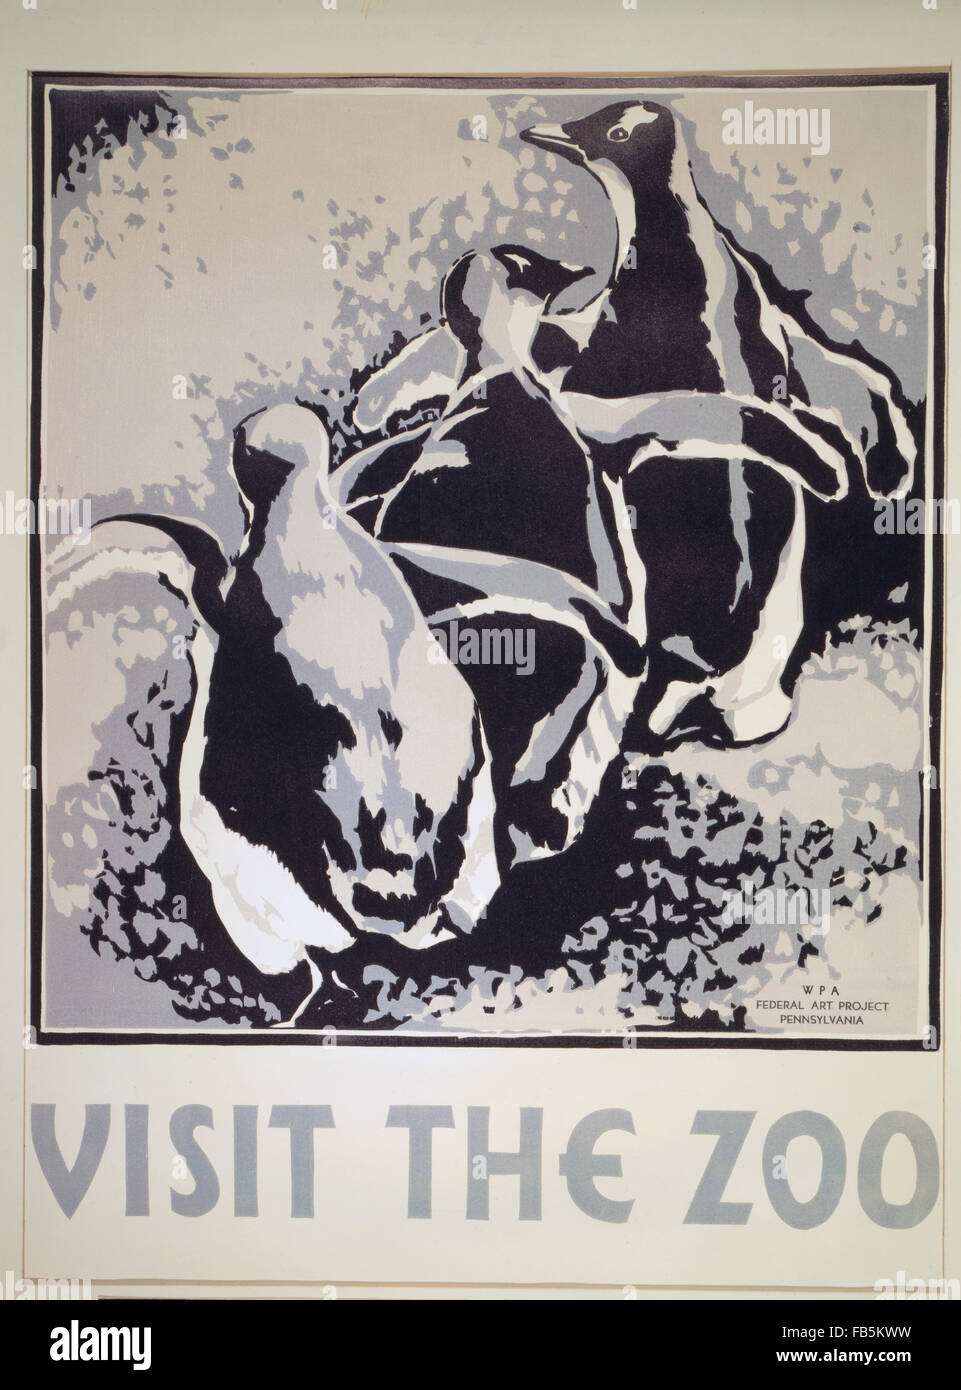 Work Projects Administration (WPA) poster promoting zoos, produced between 1936 and 1943. (Library of Congress) Stock Photo